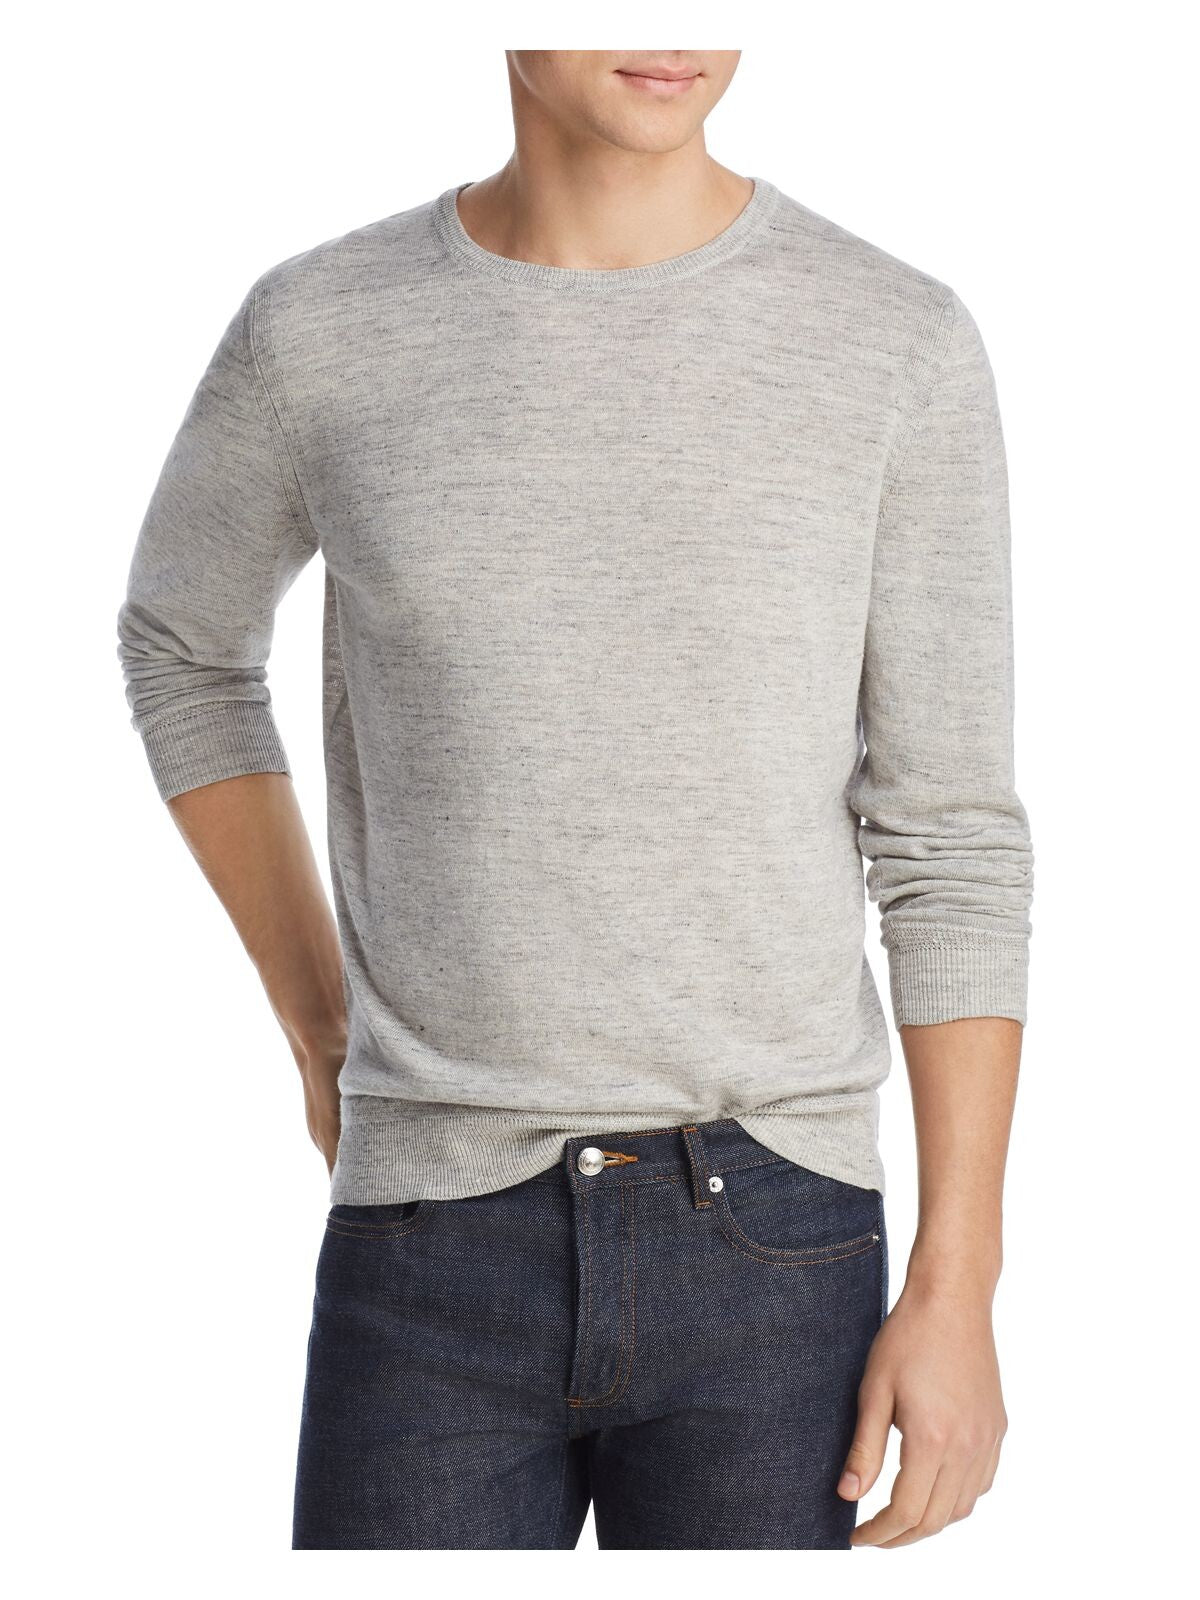 The Mens store Mens Gray Heather Crew Neck Pullover Sweater S